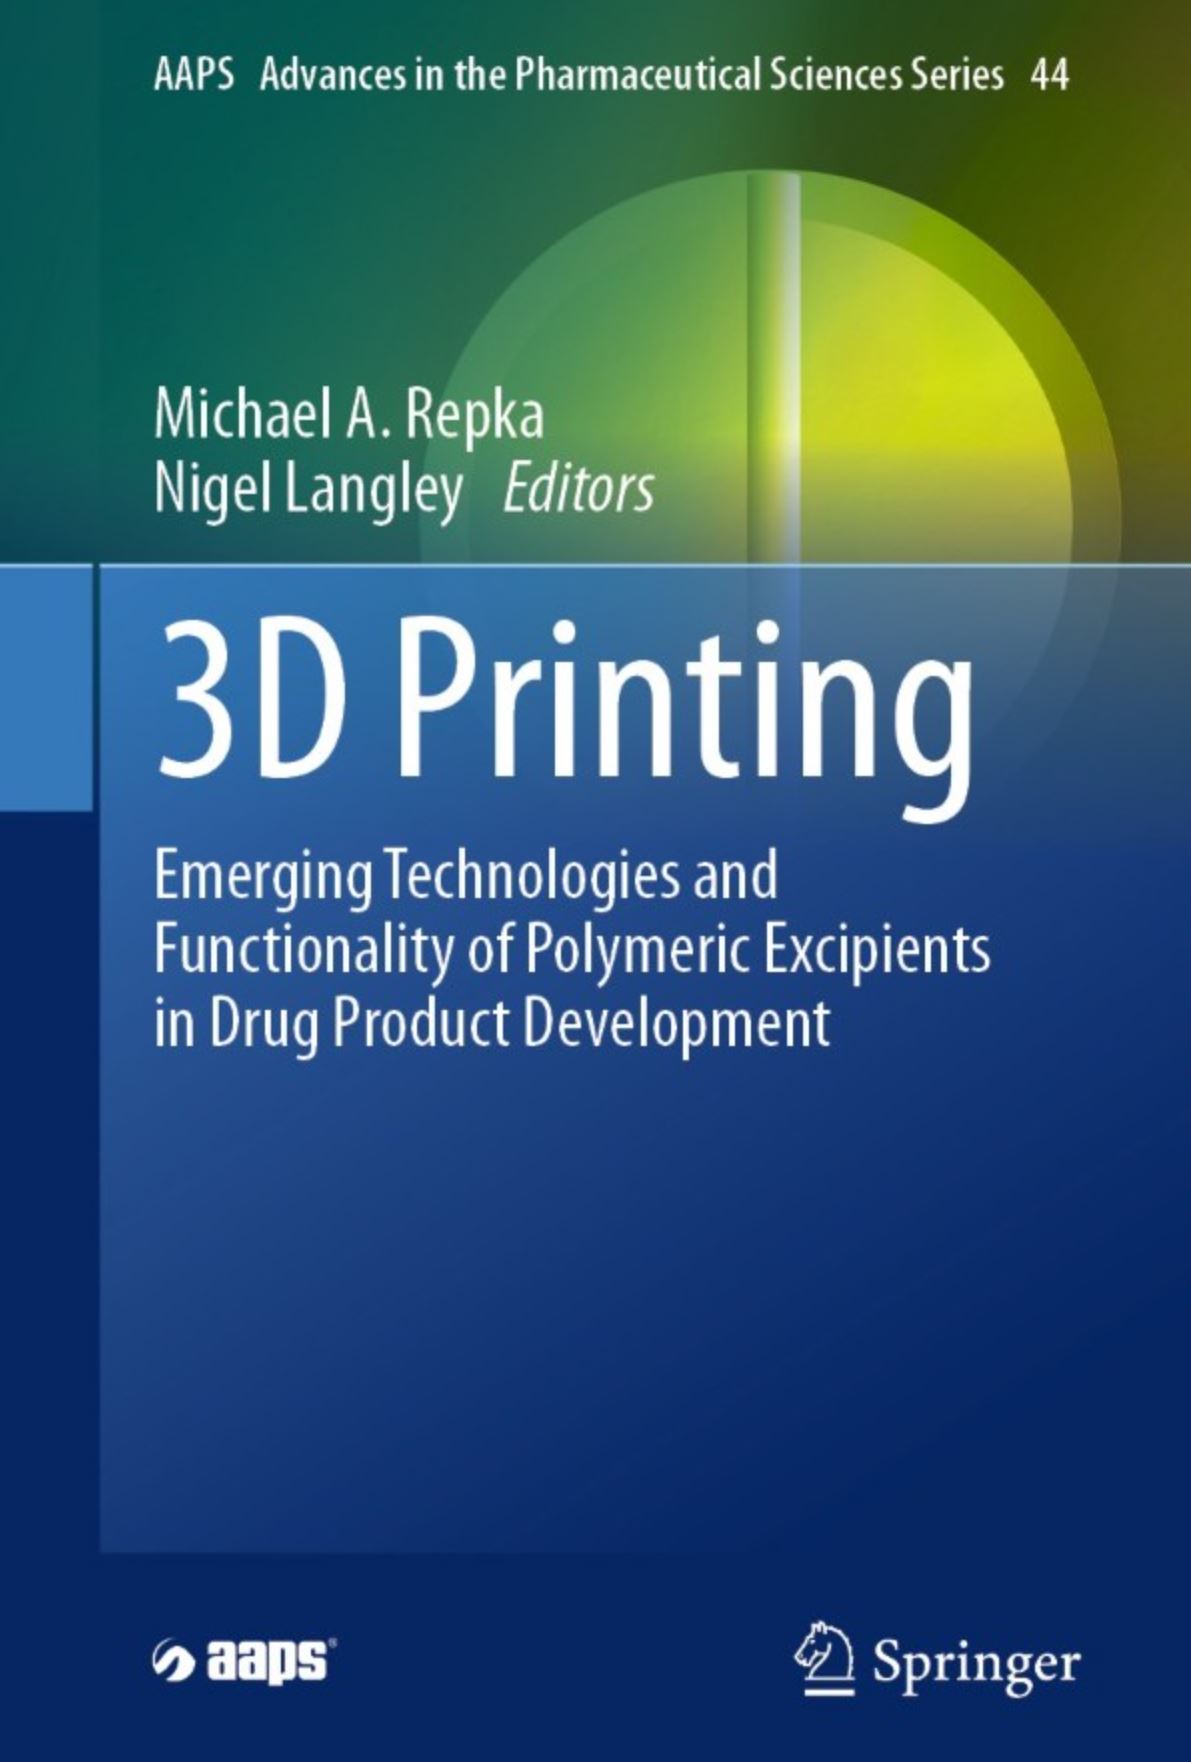 Semisolid Extrusion Printing and 3D Bioprinting